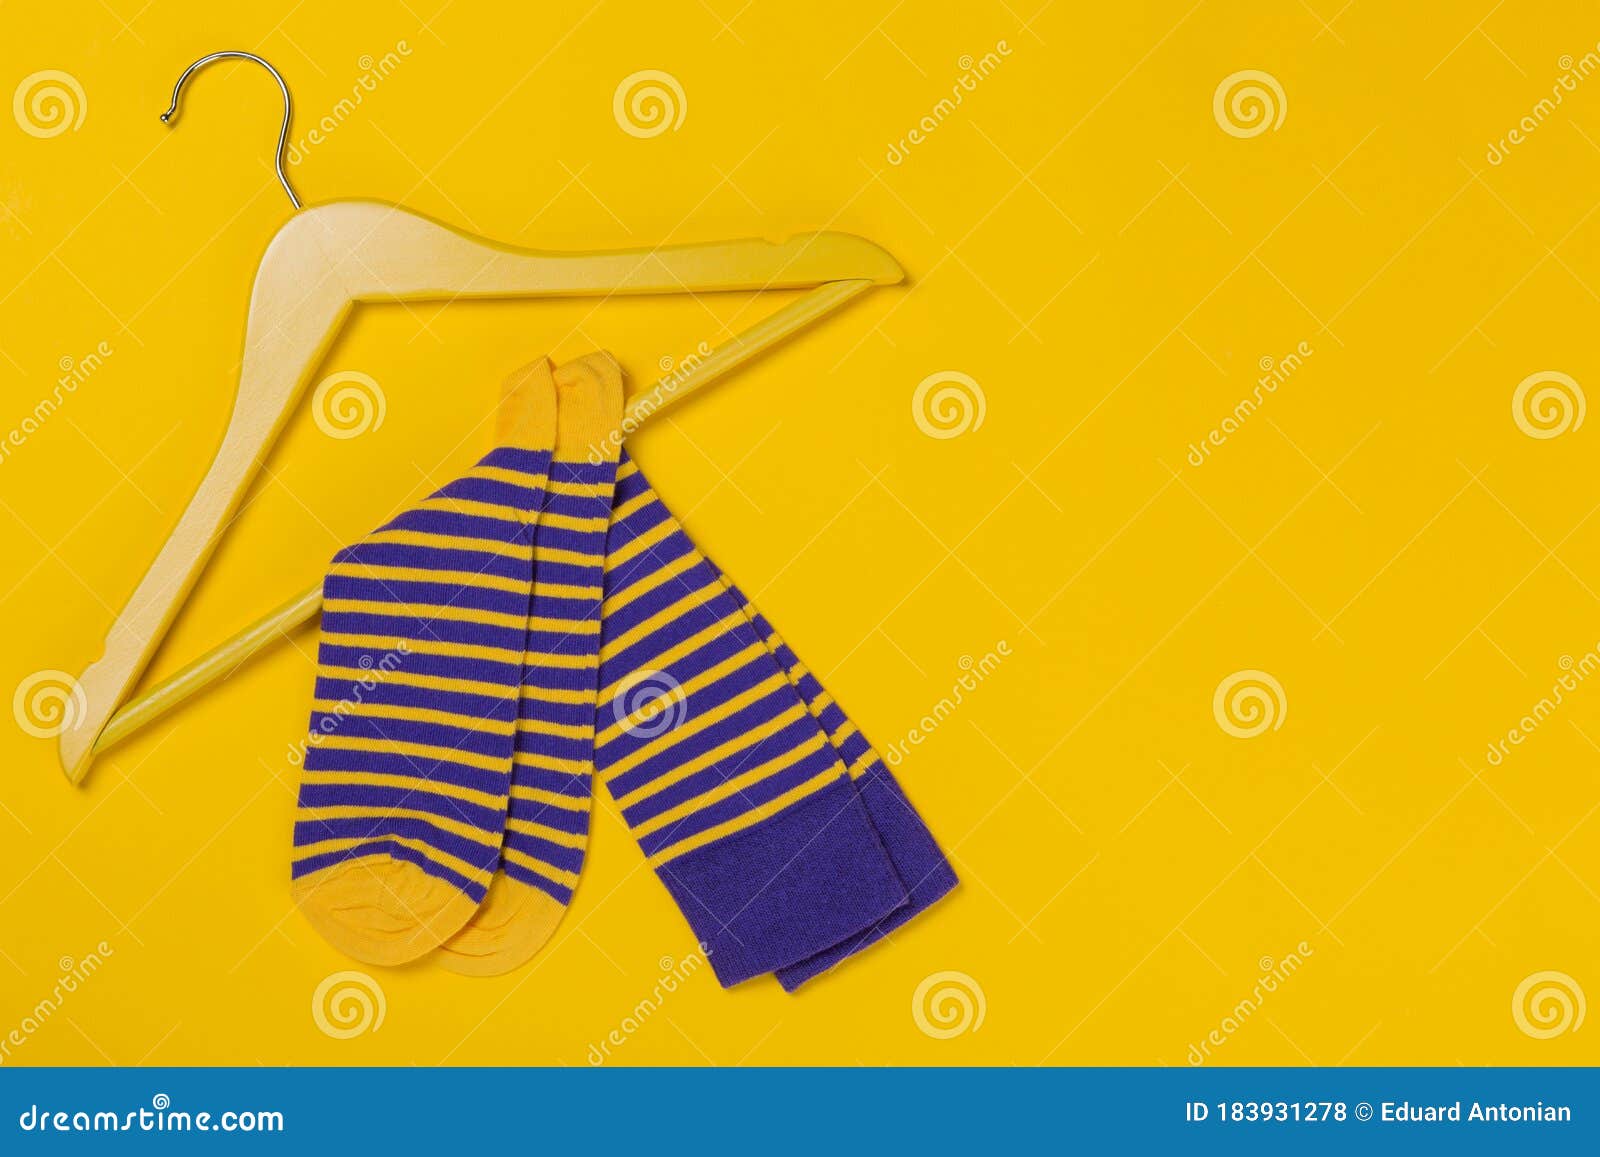 Pair of Blue Yellow Striped Socks on a Yellow Wooden Hanger, Shopping ...